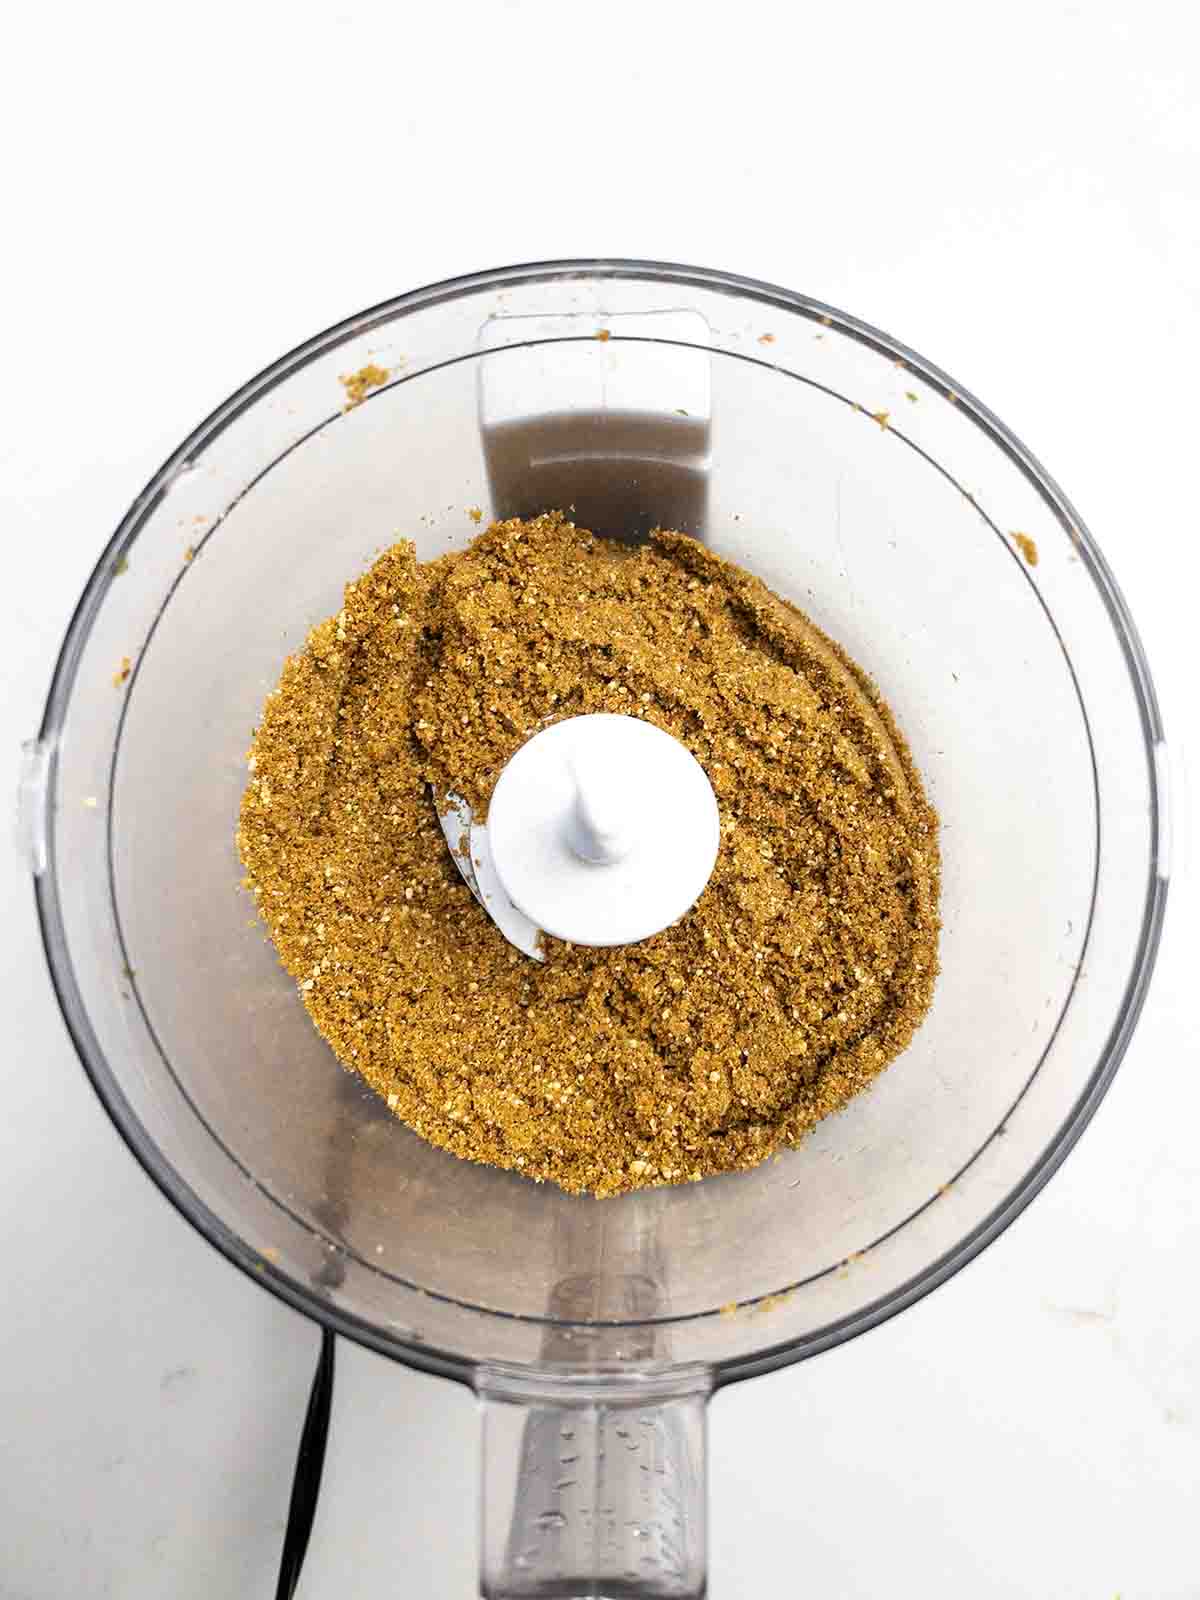 gingersnaps and pepita crumbs in a food processor